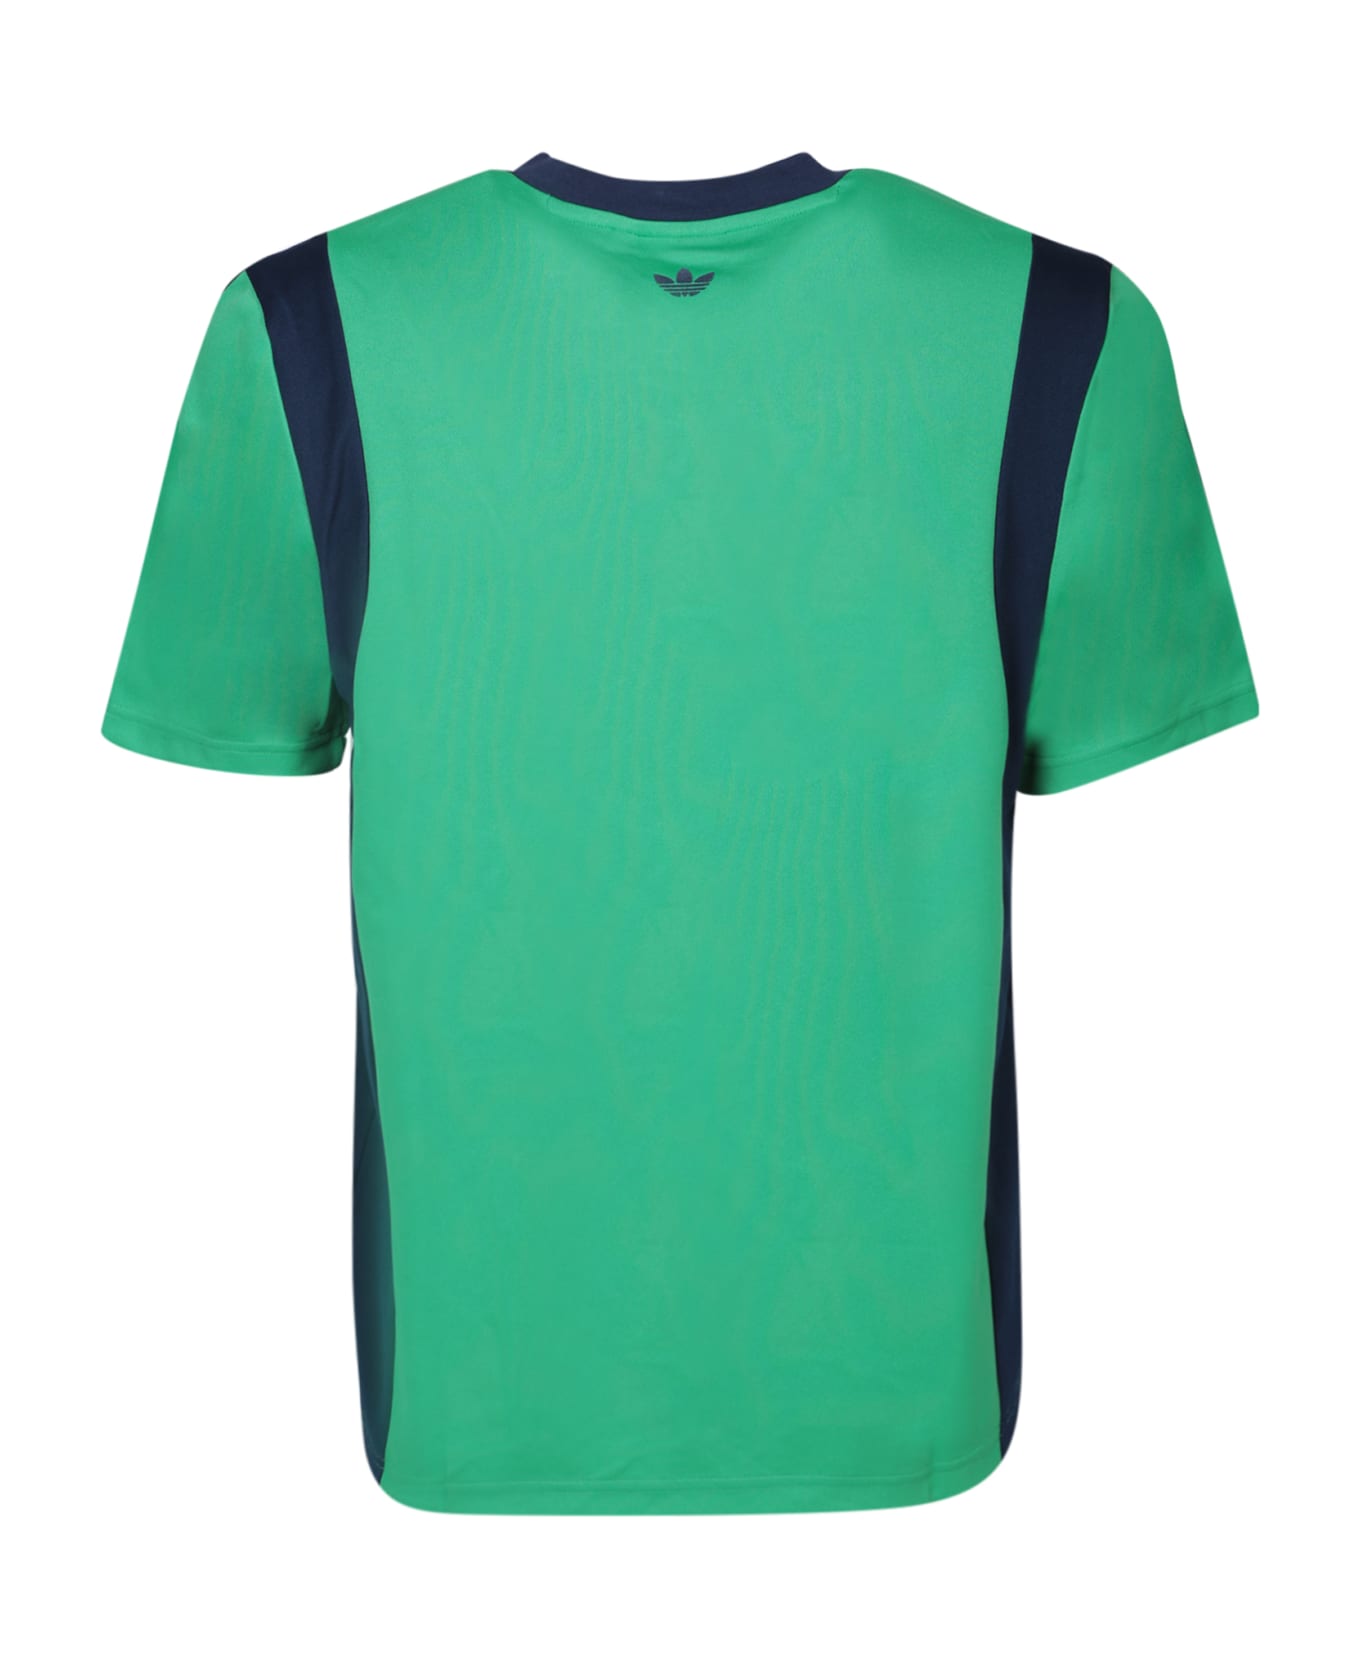 Y-3 Striped Details Green T-shirt - Green シャツ